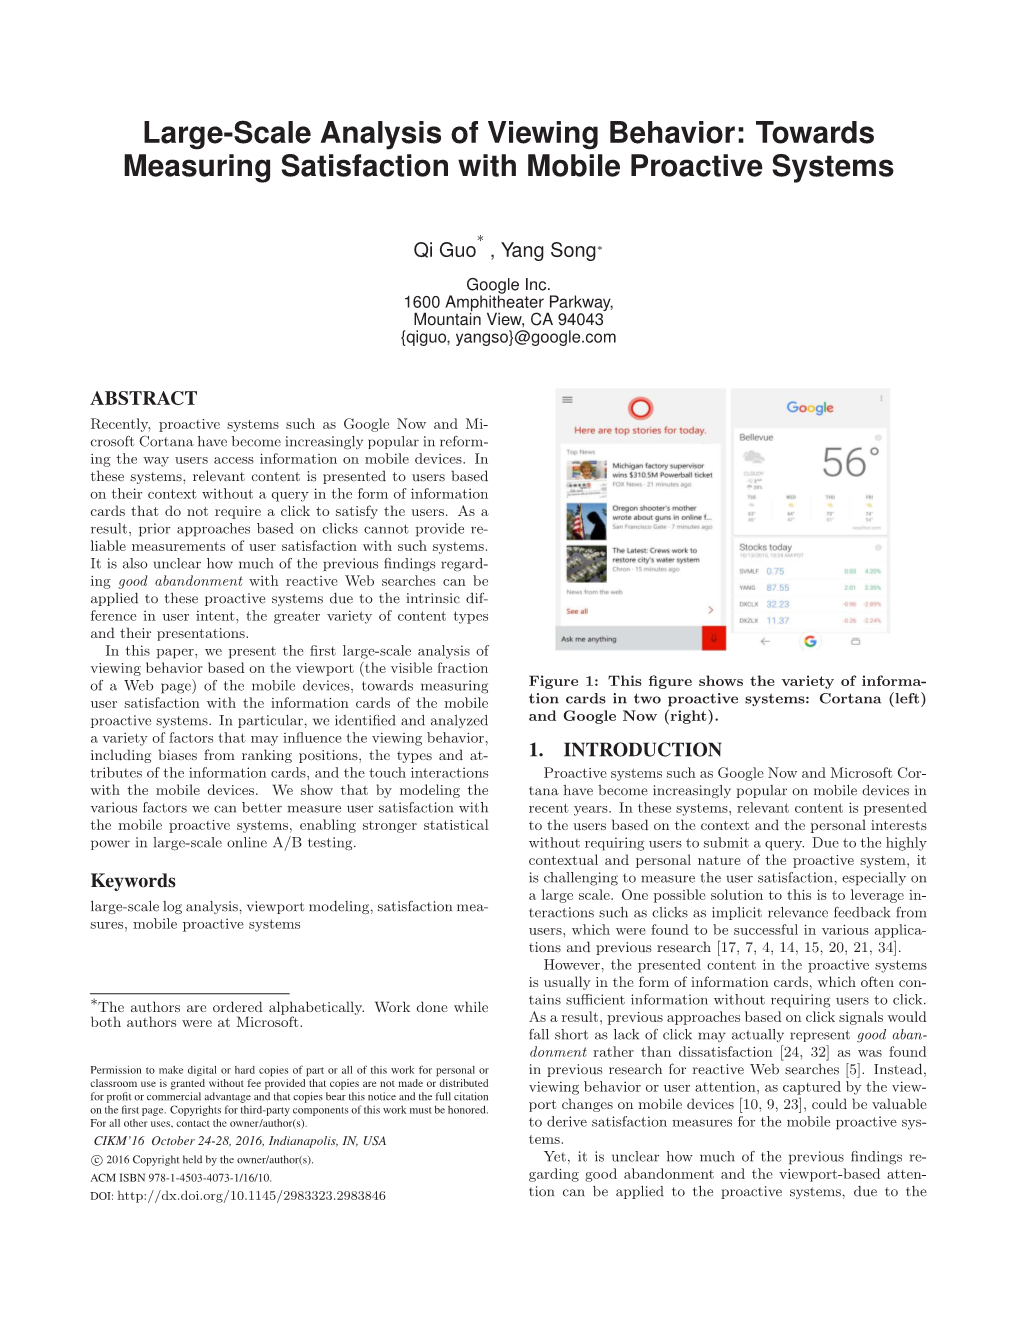 Towards Measuring Satisfaction with Mobile Proactive Systems